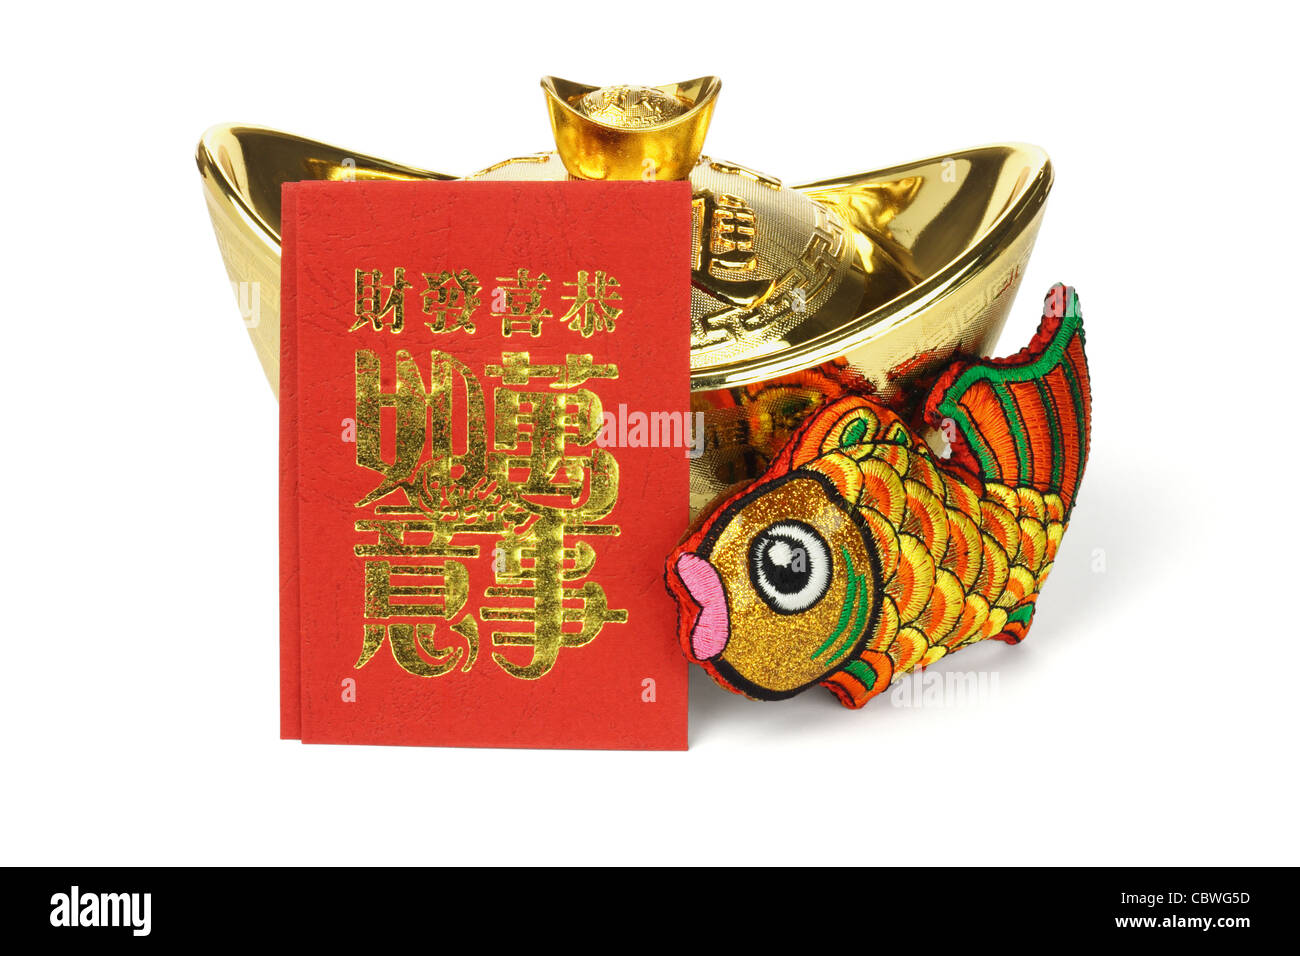 Chinese New Year red packets and auspicious ornaments on white background Stock Photo